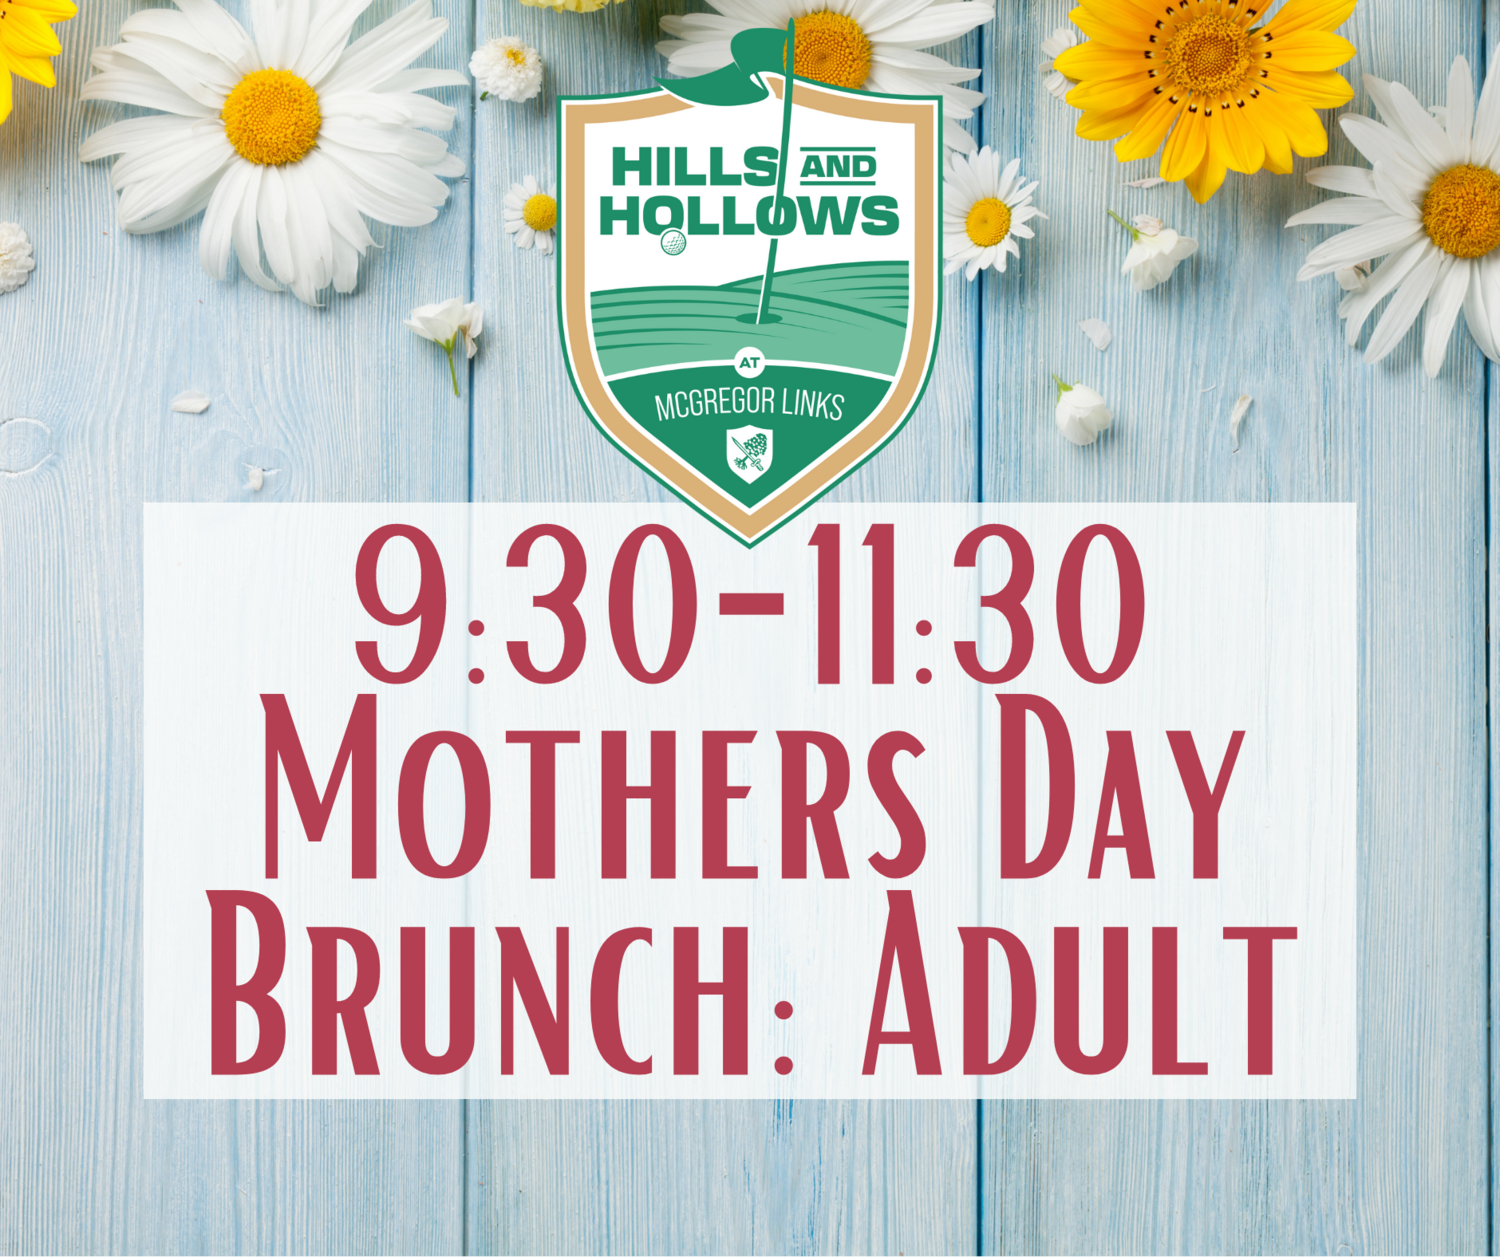 Hills & Hollows Mother's Day Brunch 9:30 seating: Adult